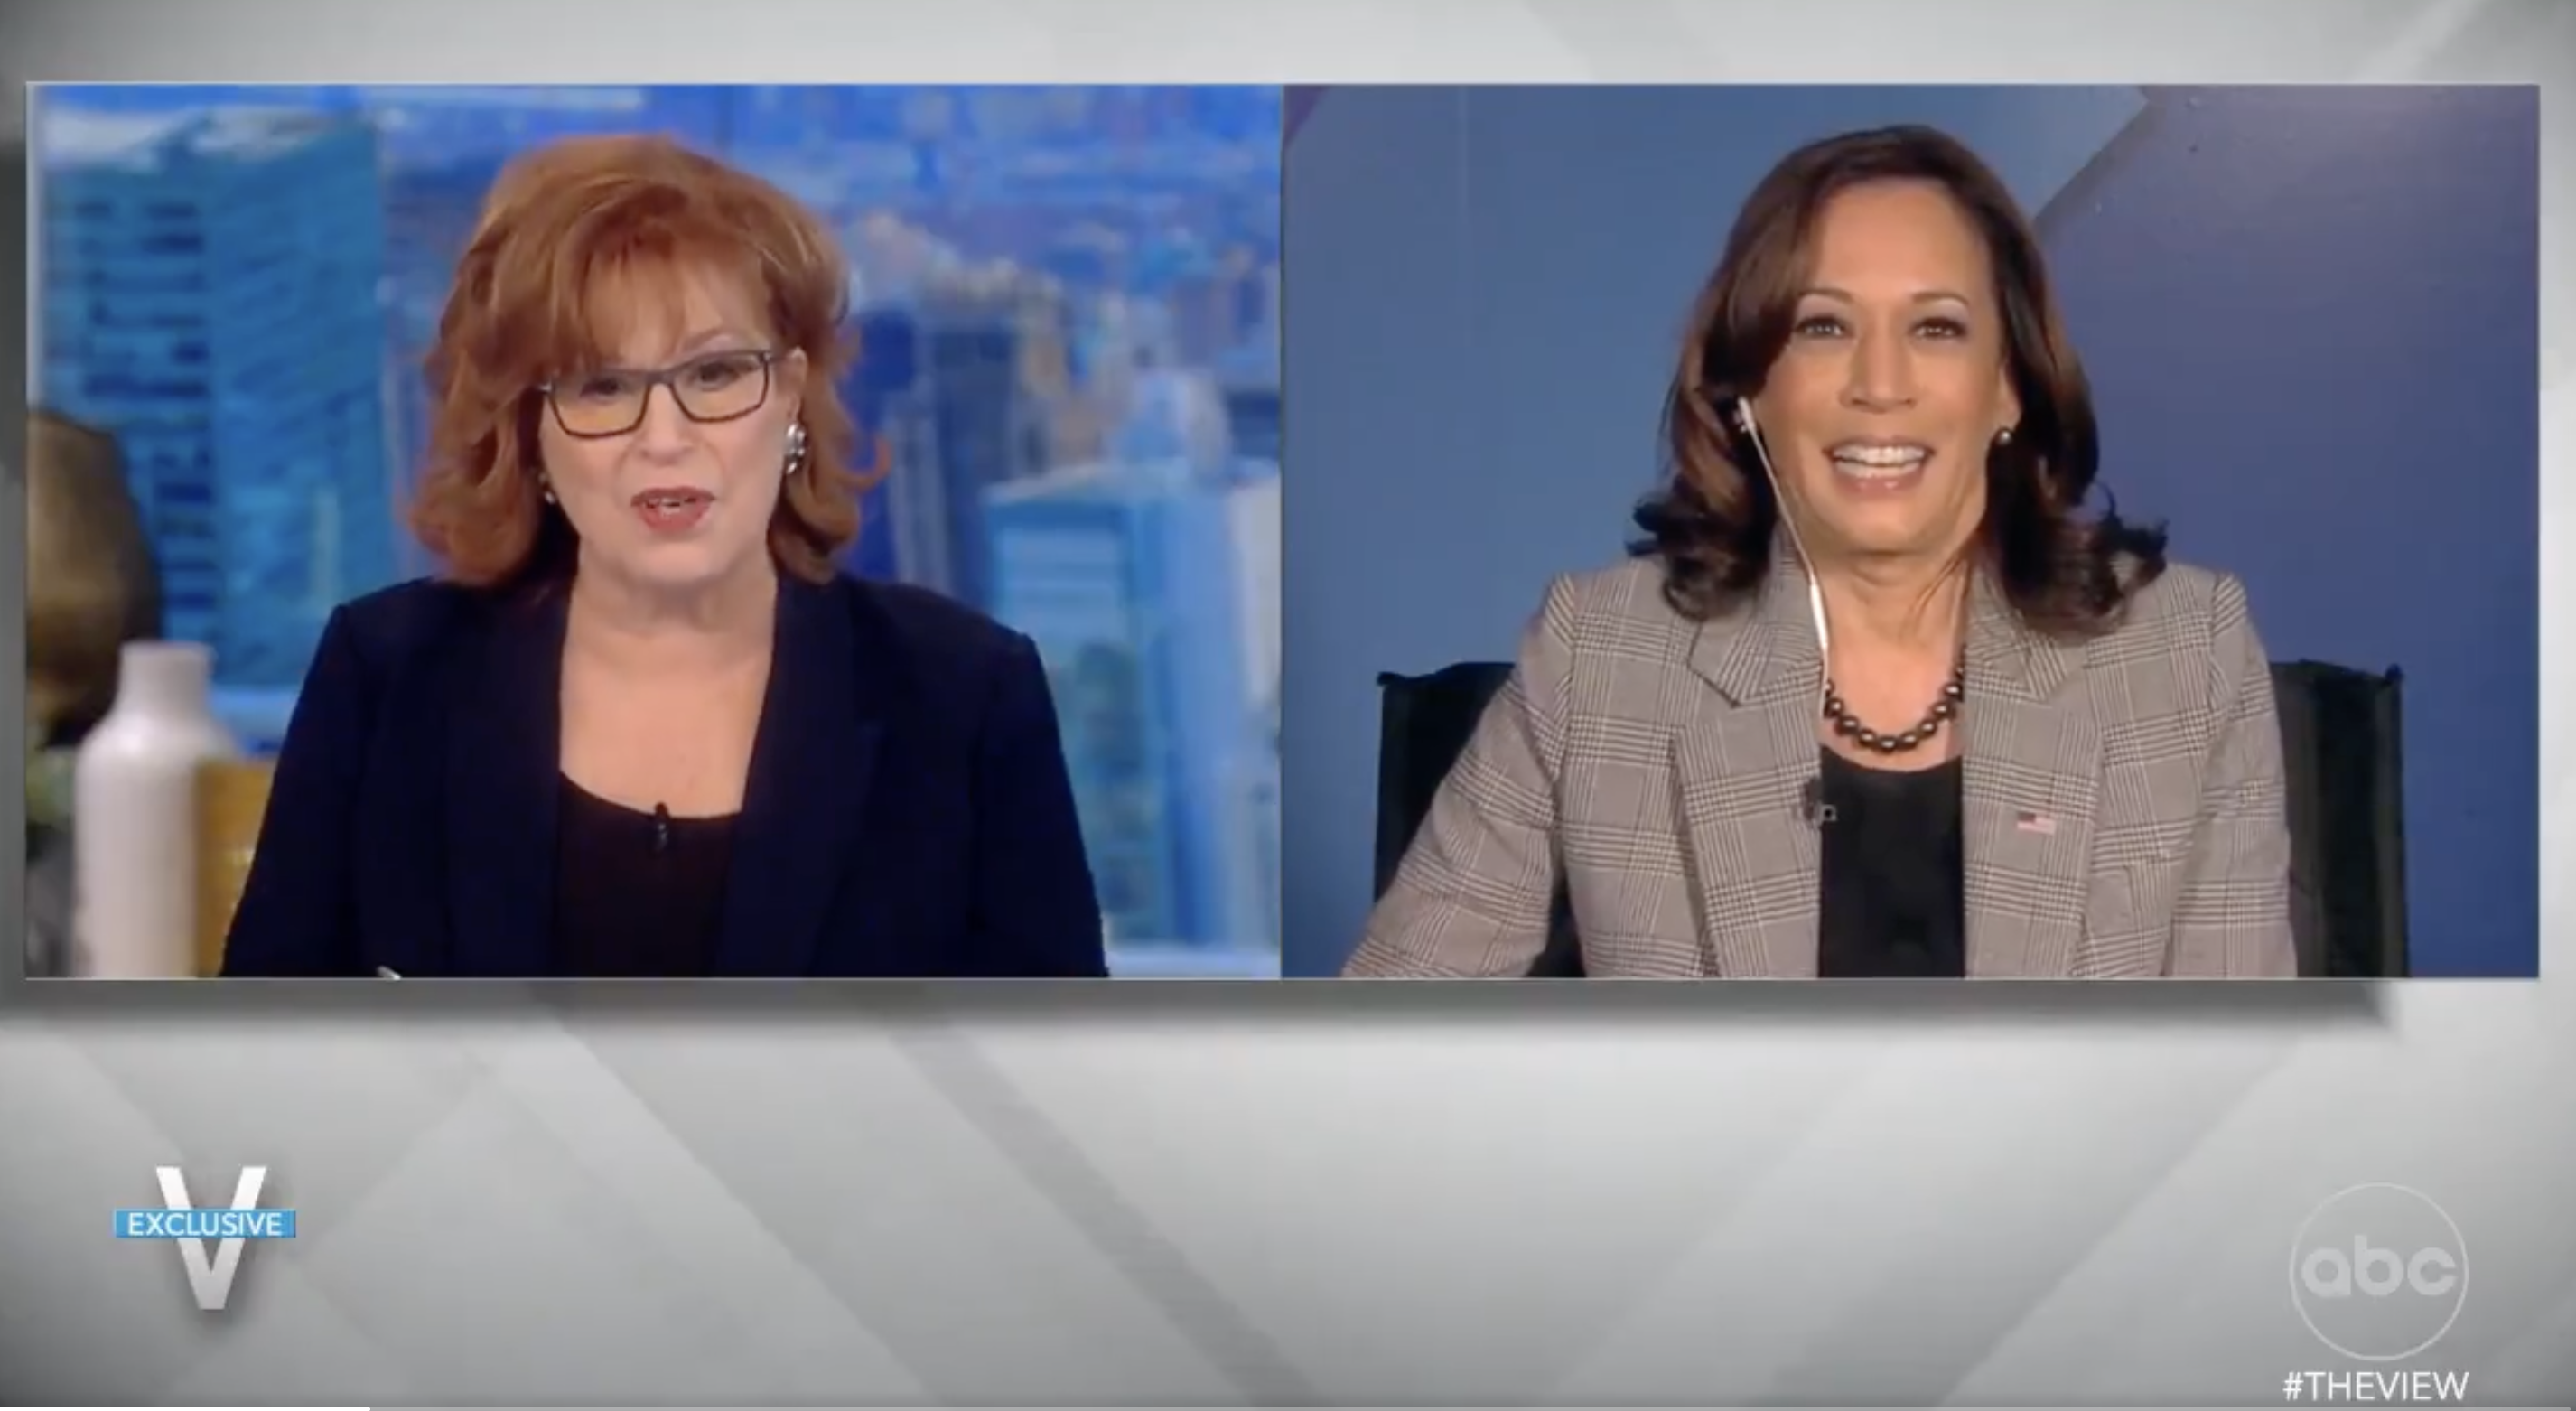 Image of Kamala Harris being interviewed virtually on The View.